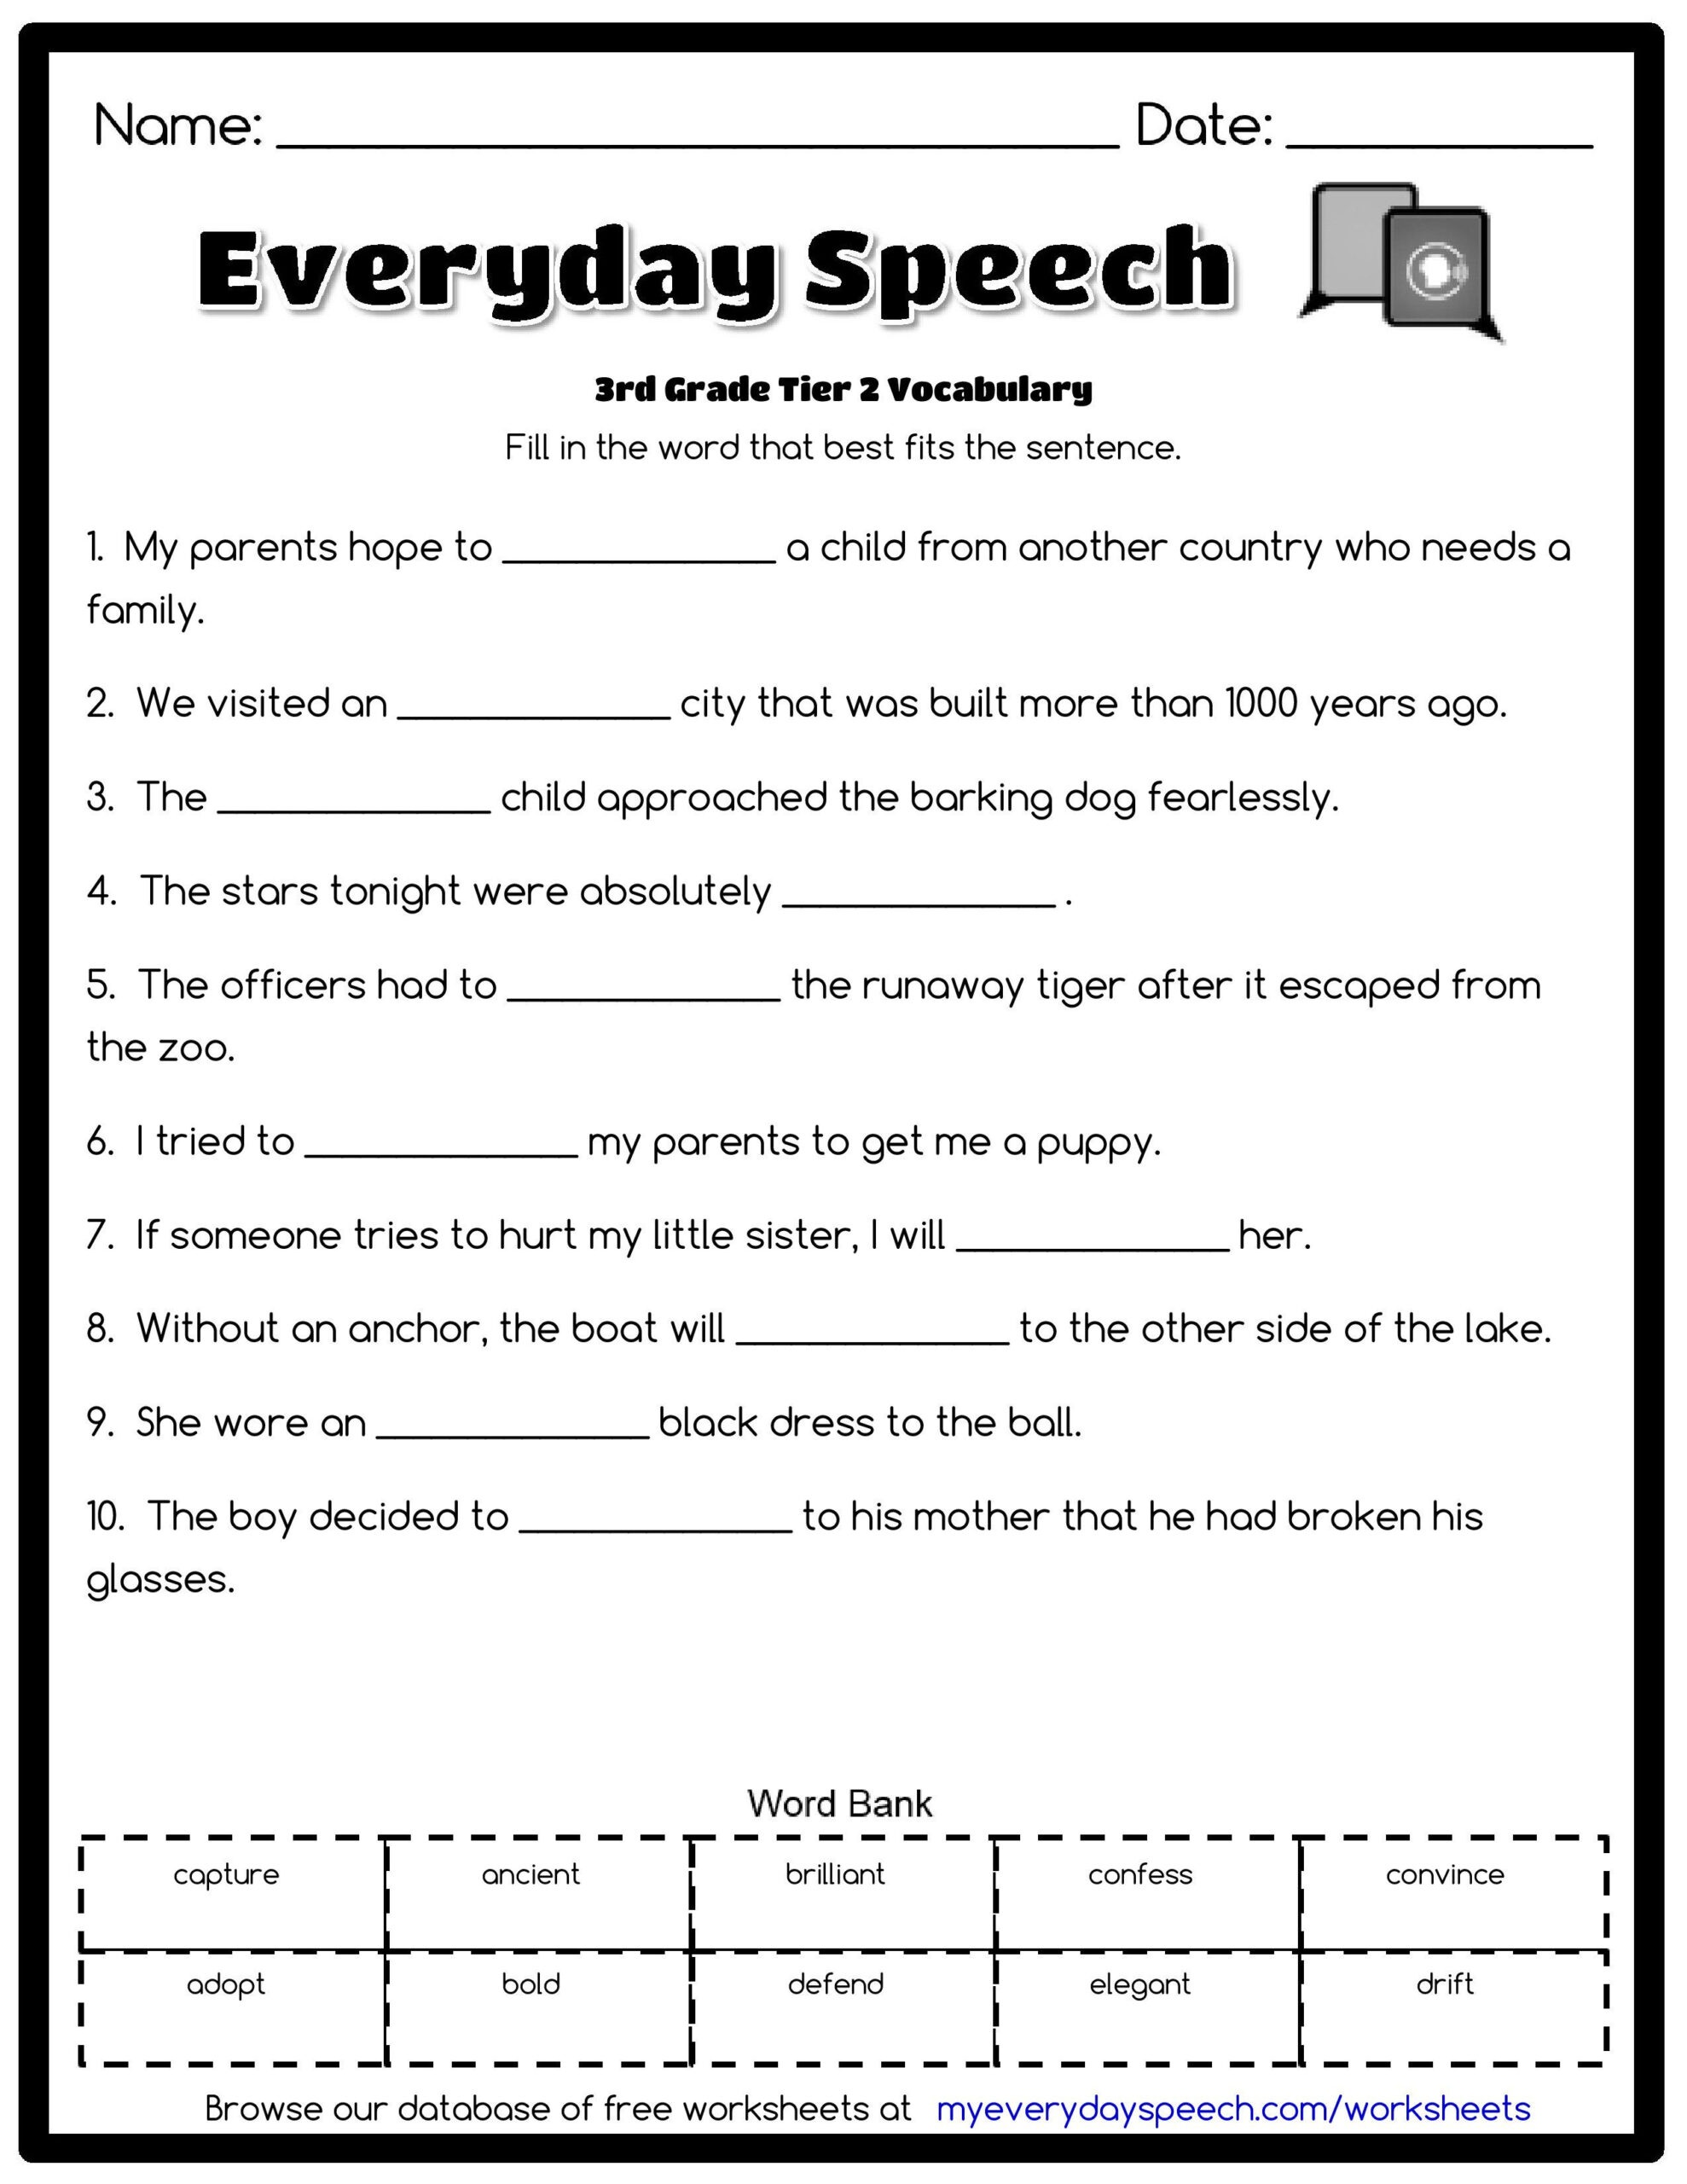 LinearPeriodic Figurative Language Worksheets Middle School 